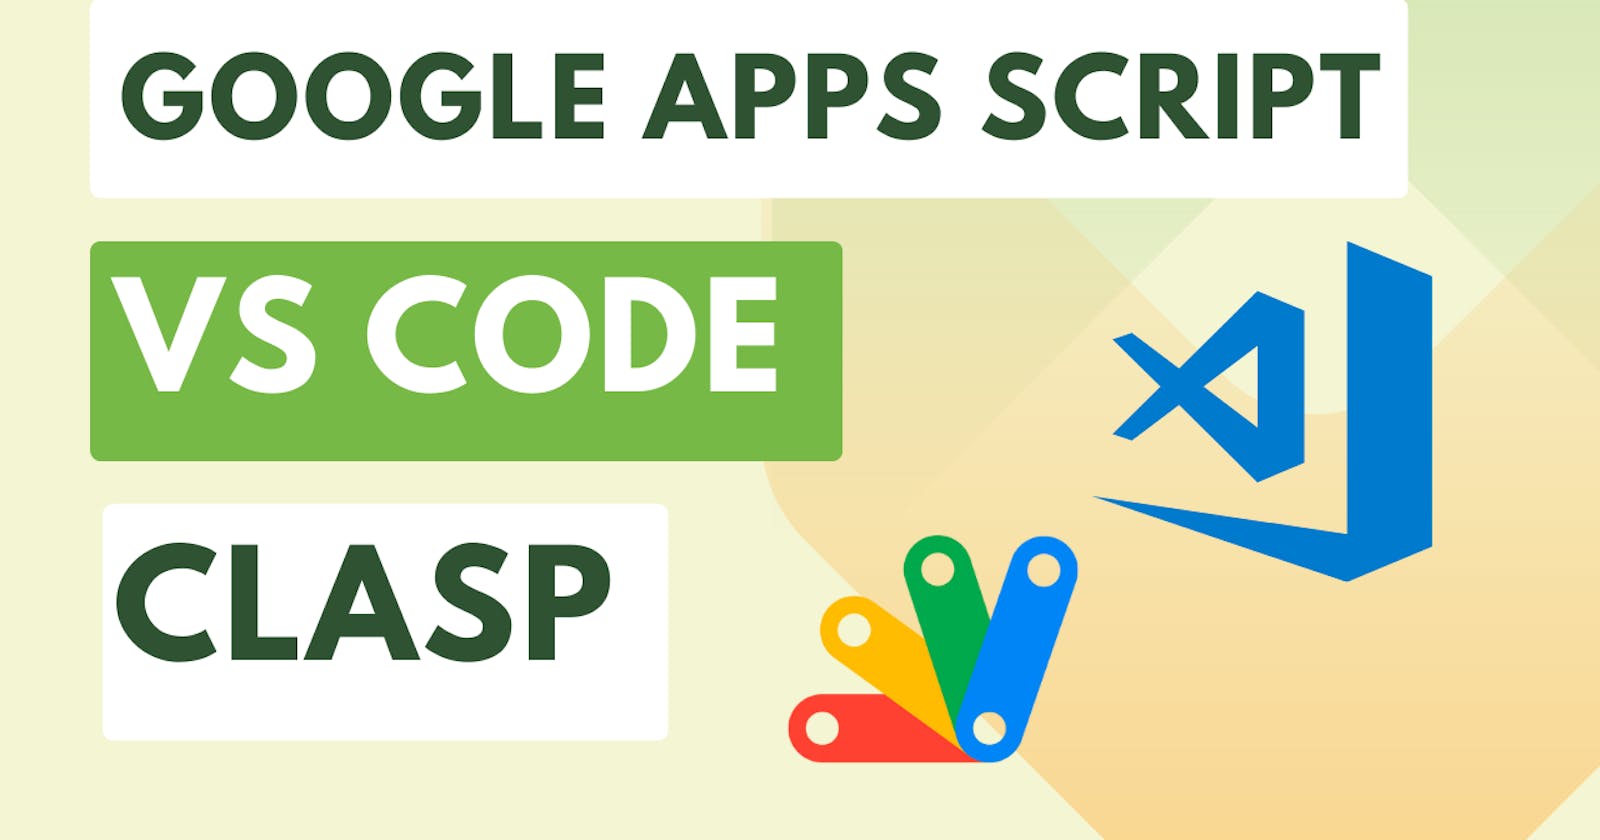 How to Write Google Apps Script Code Locally In Your Favorite IDE?